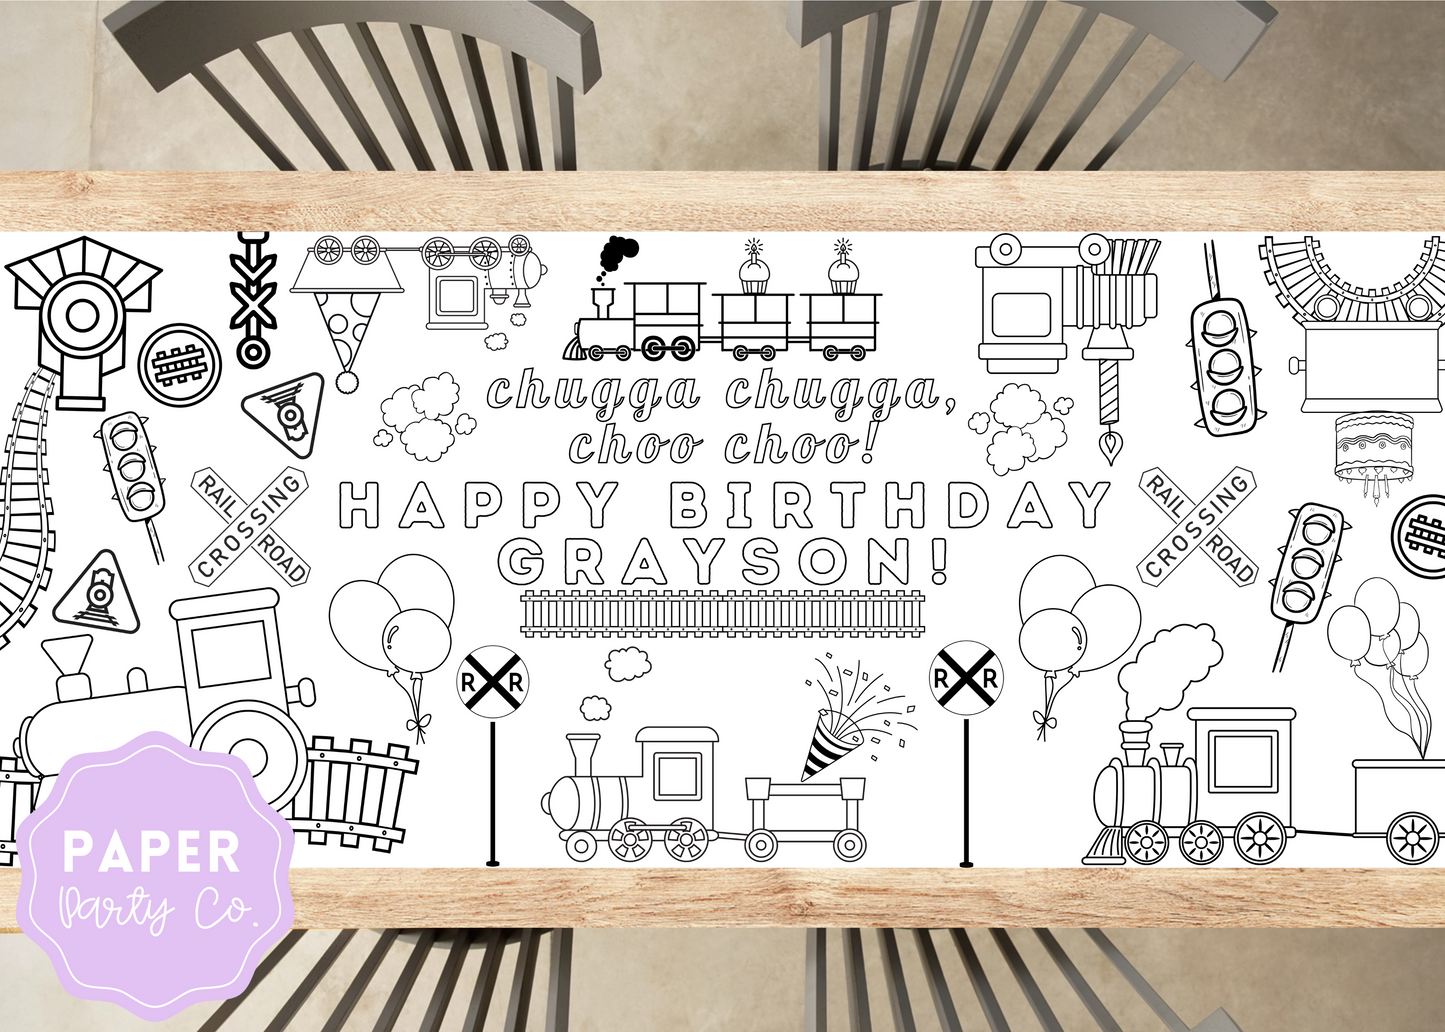 LARGE Train Coloring Banner Poster | Coloring Table Runner | Train Birthday Activity | Coloring Sheet Banner | Train Birthday Party |